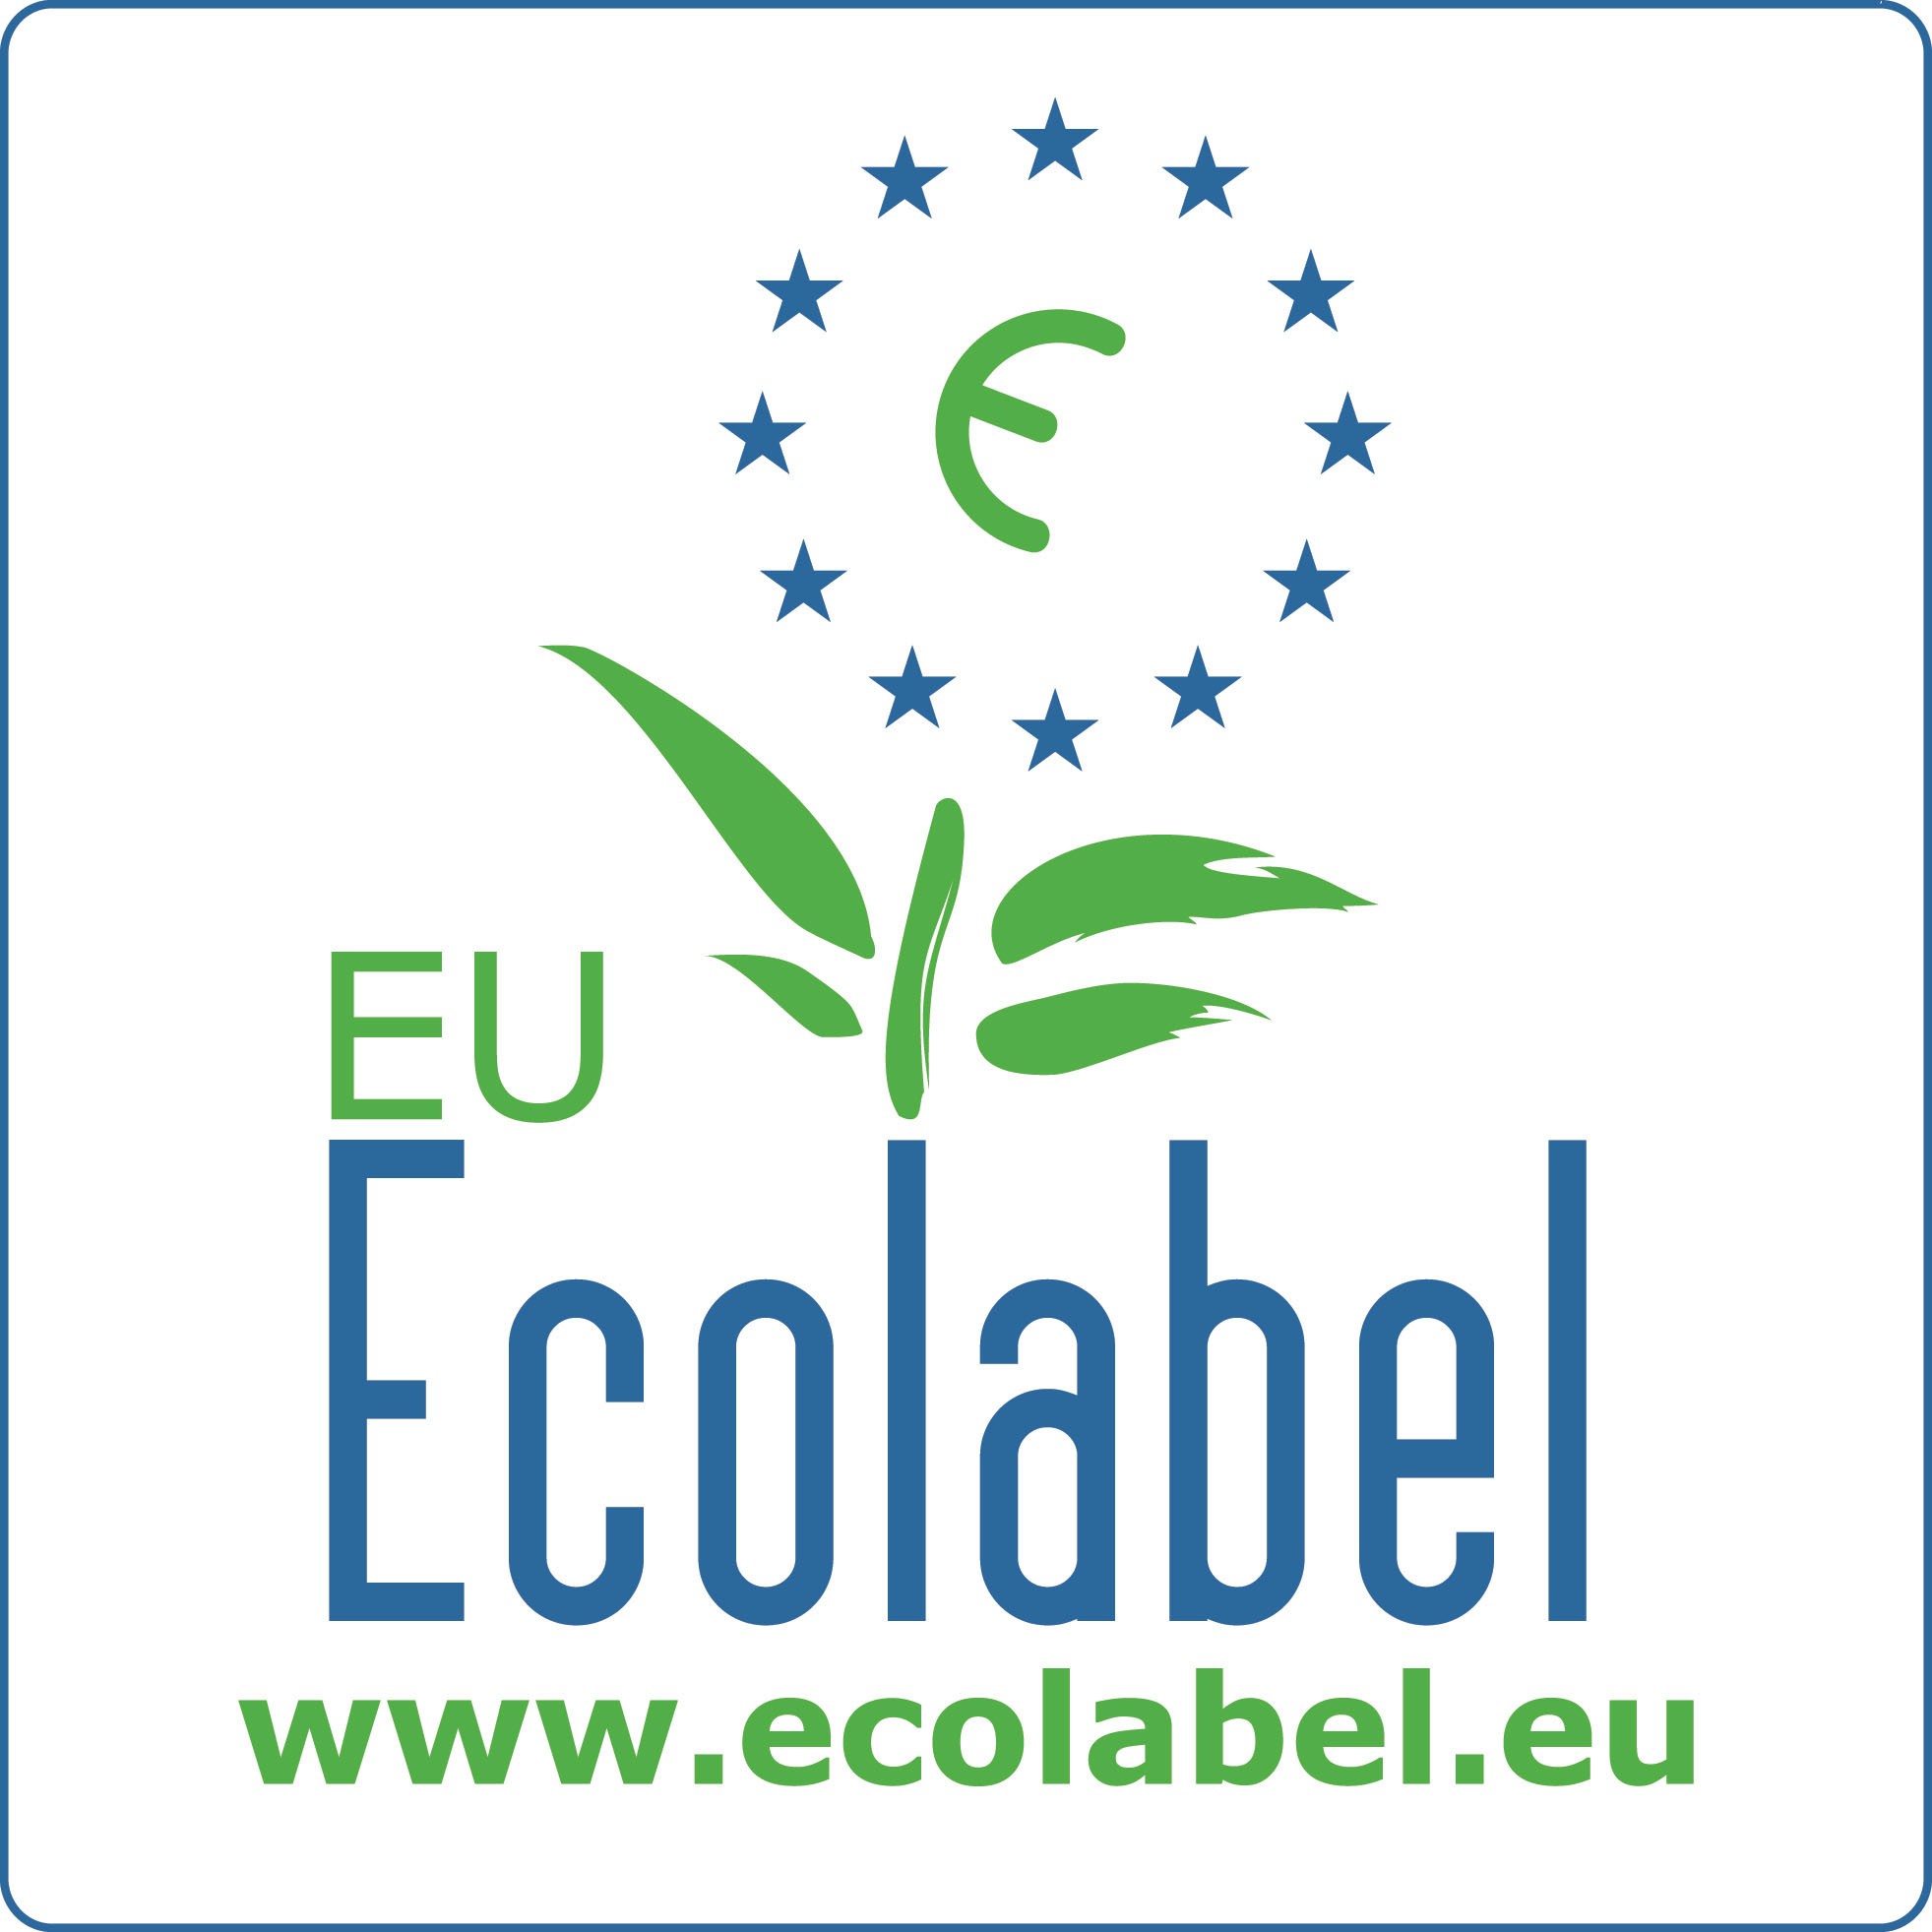 SONATA AND ECOLABEL CERTIFICATION